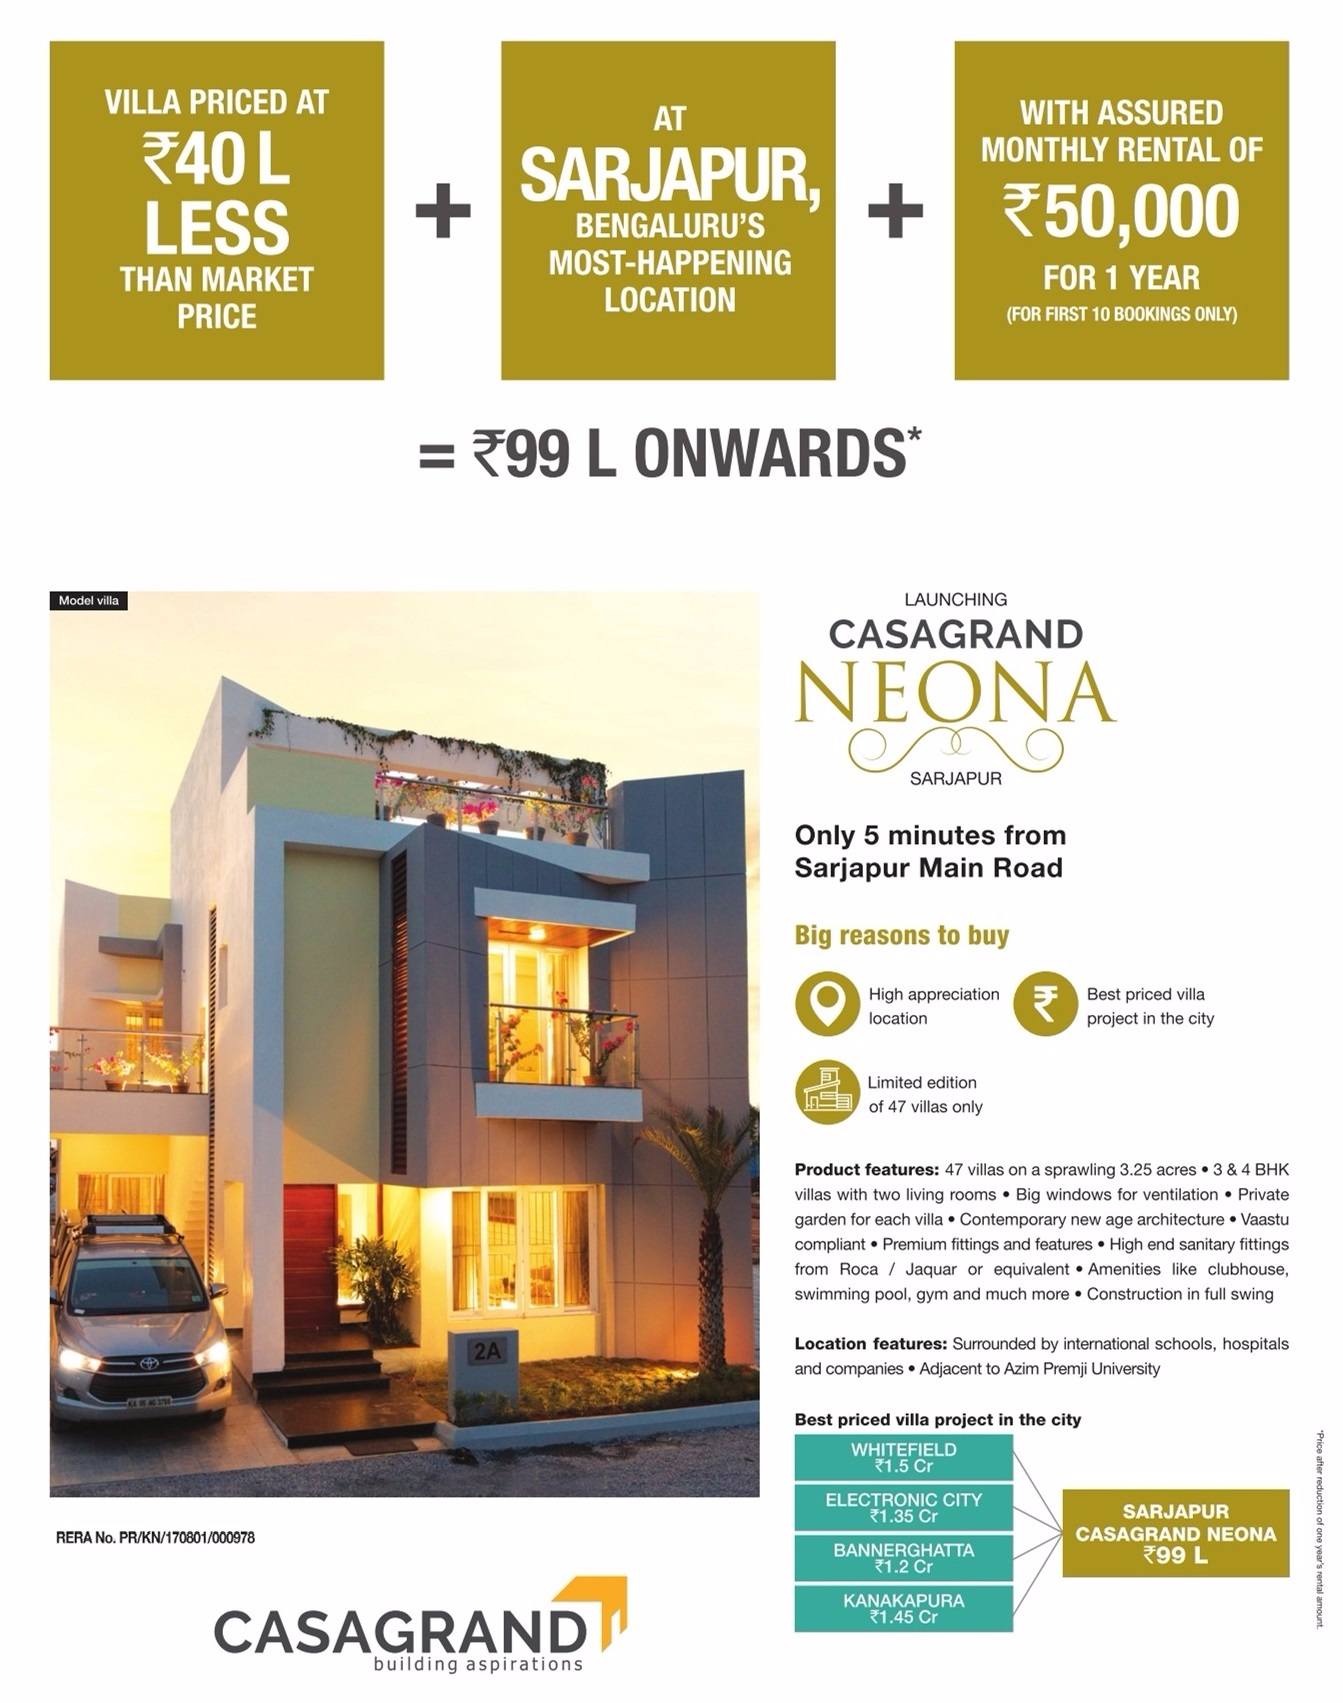 Launching Casa Grand Neona at Sarjapur the most happening location in Bangalore Update